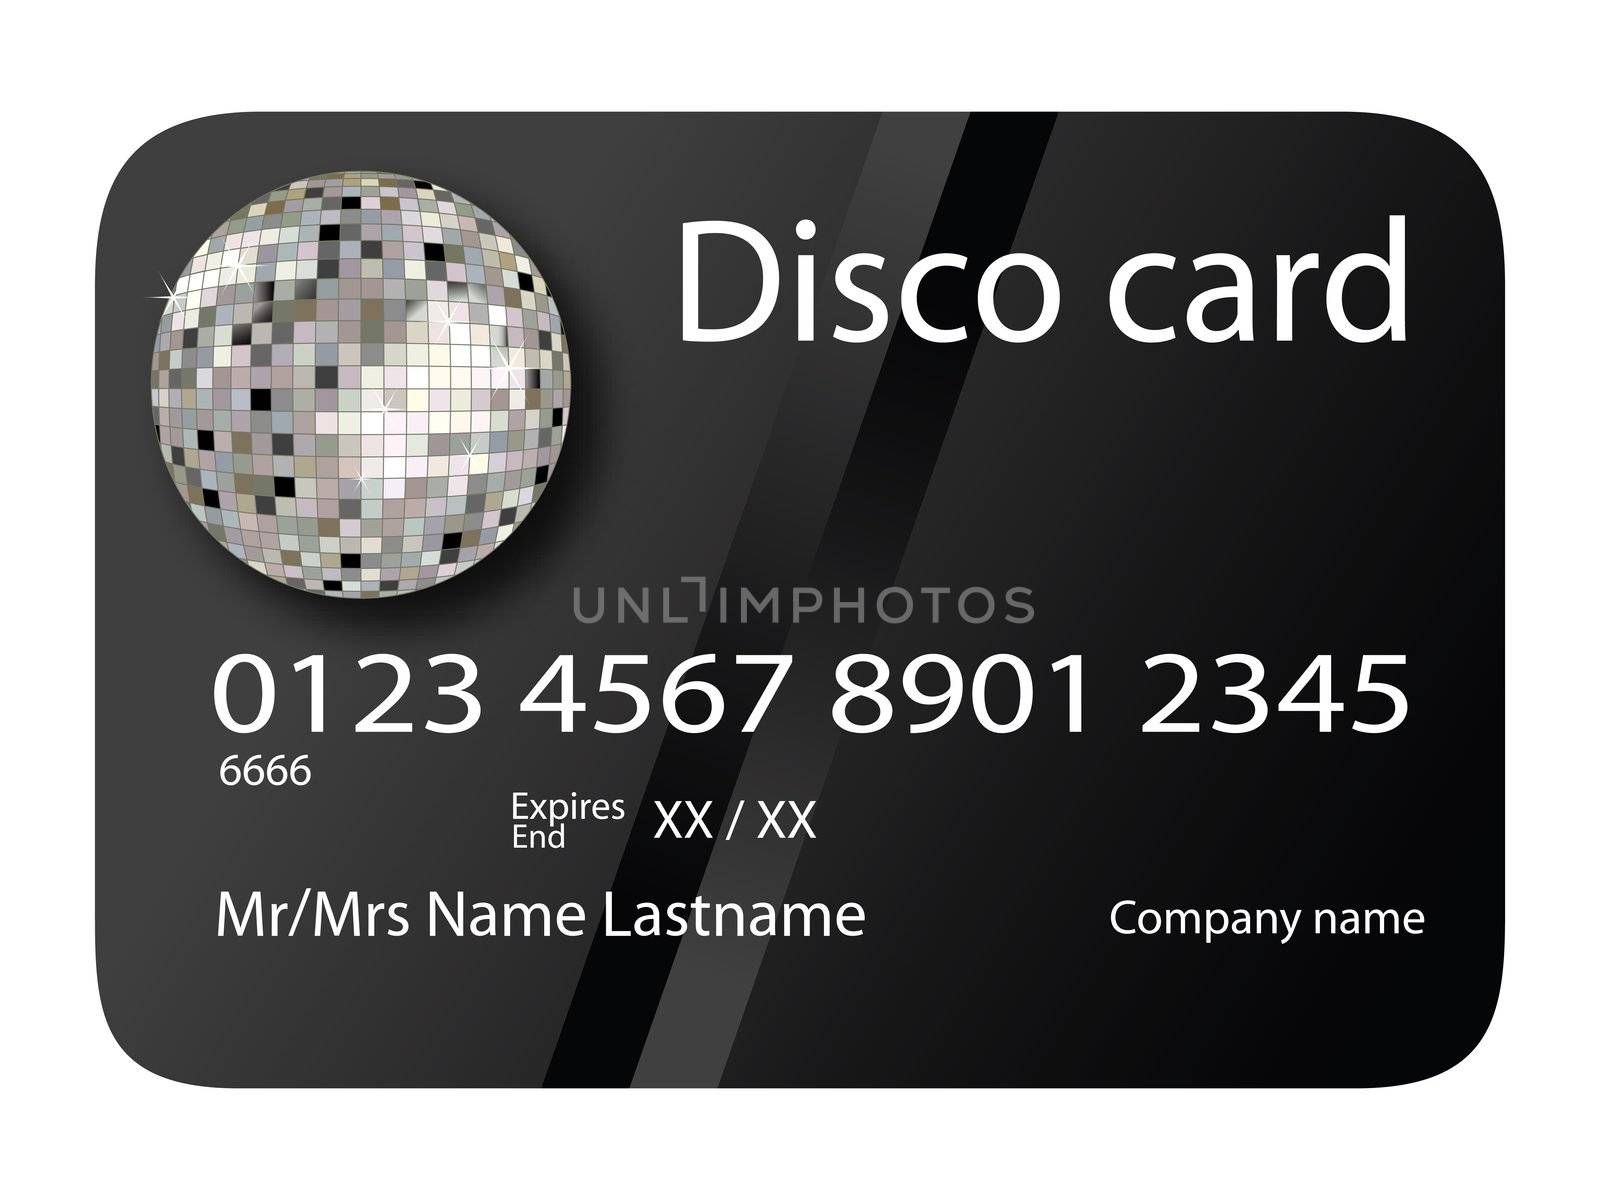 credit card disco black, vector art illustration; more credit cards in my gallery